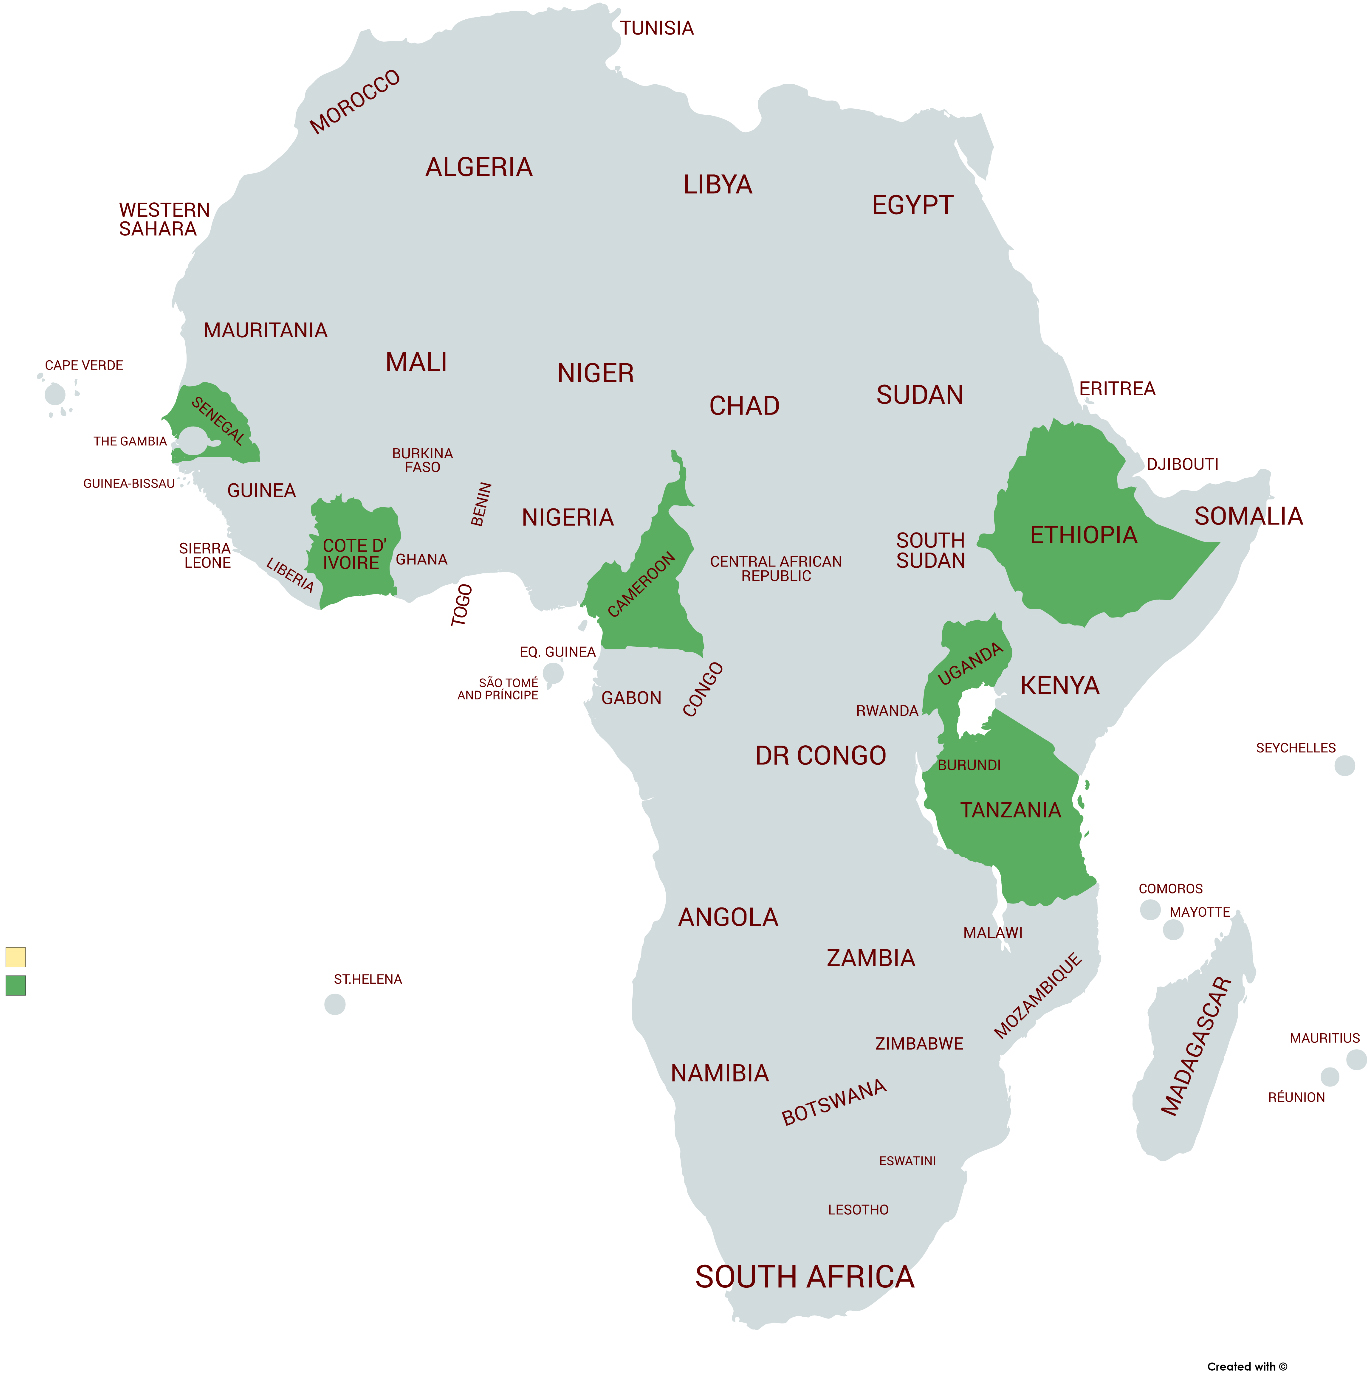 African countries hosting regional statistical training centers in the partnership. Source: authors.